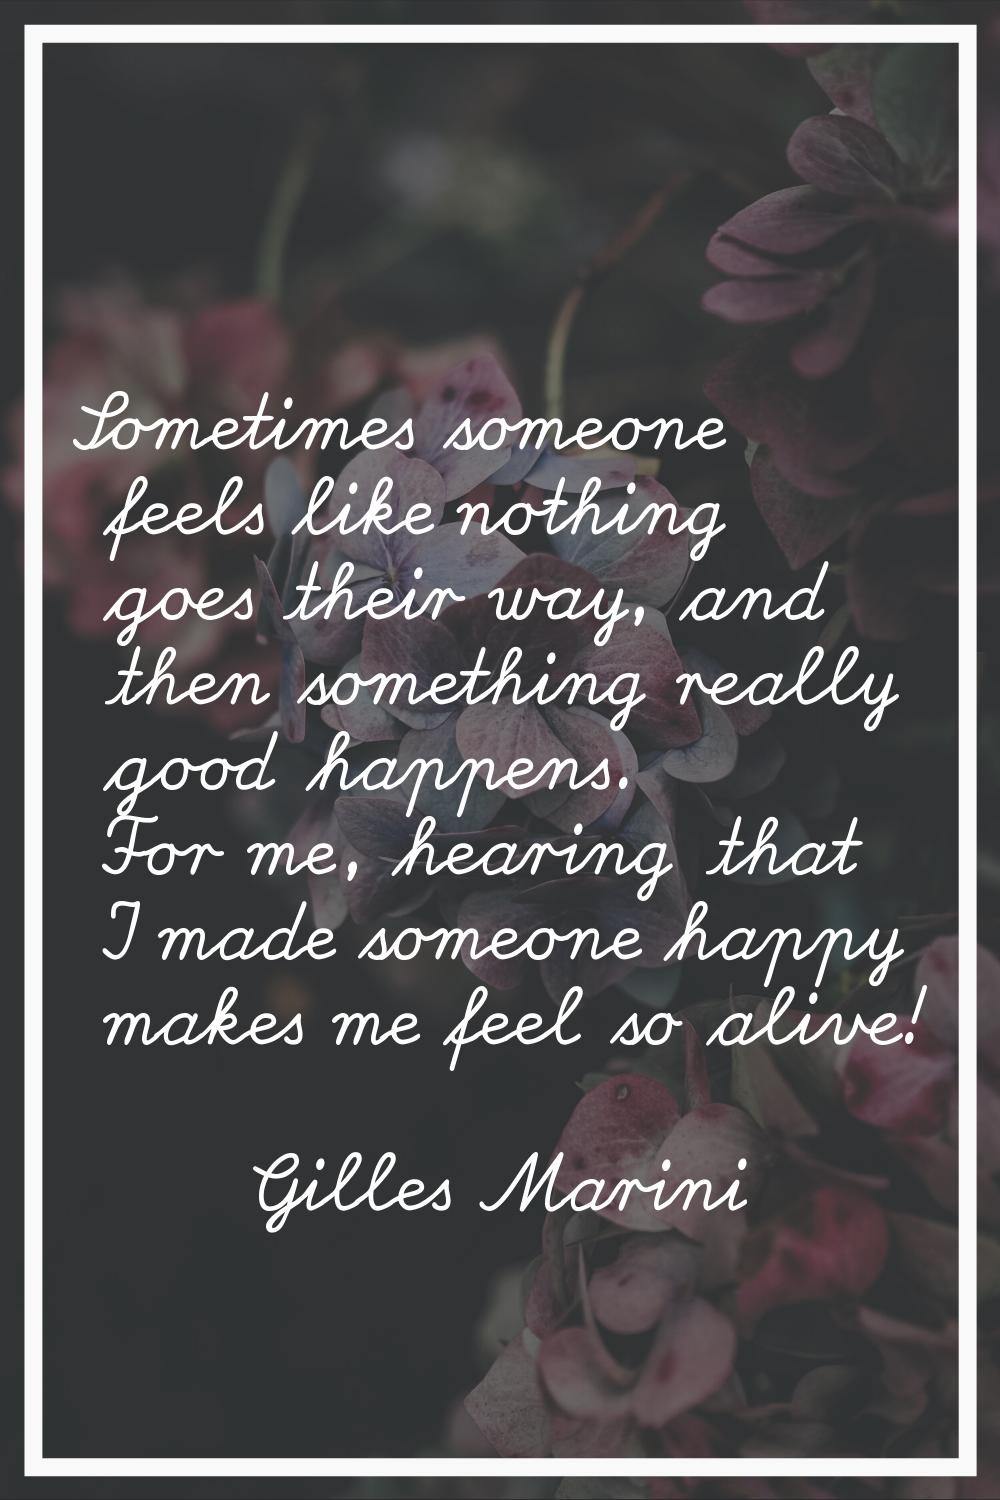 Sometimes someone feels like nothing goes their way, and then something really good happens. For me